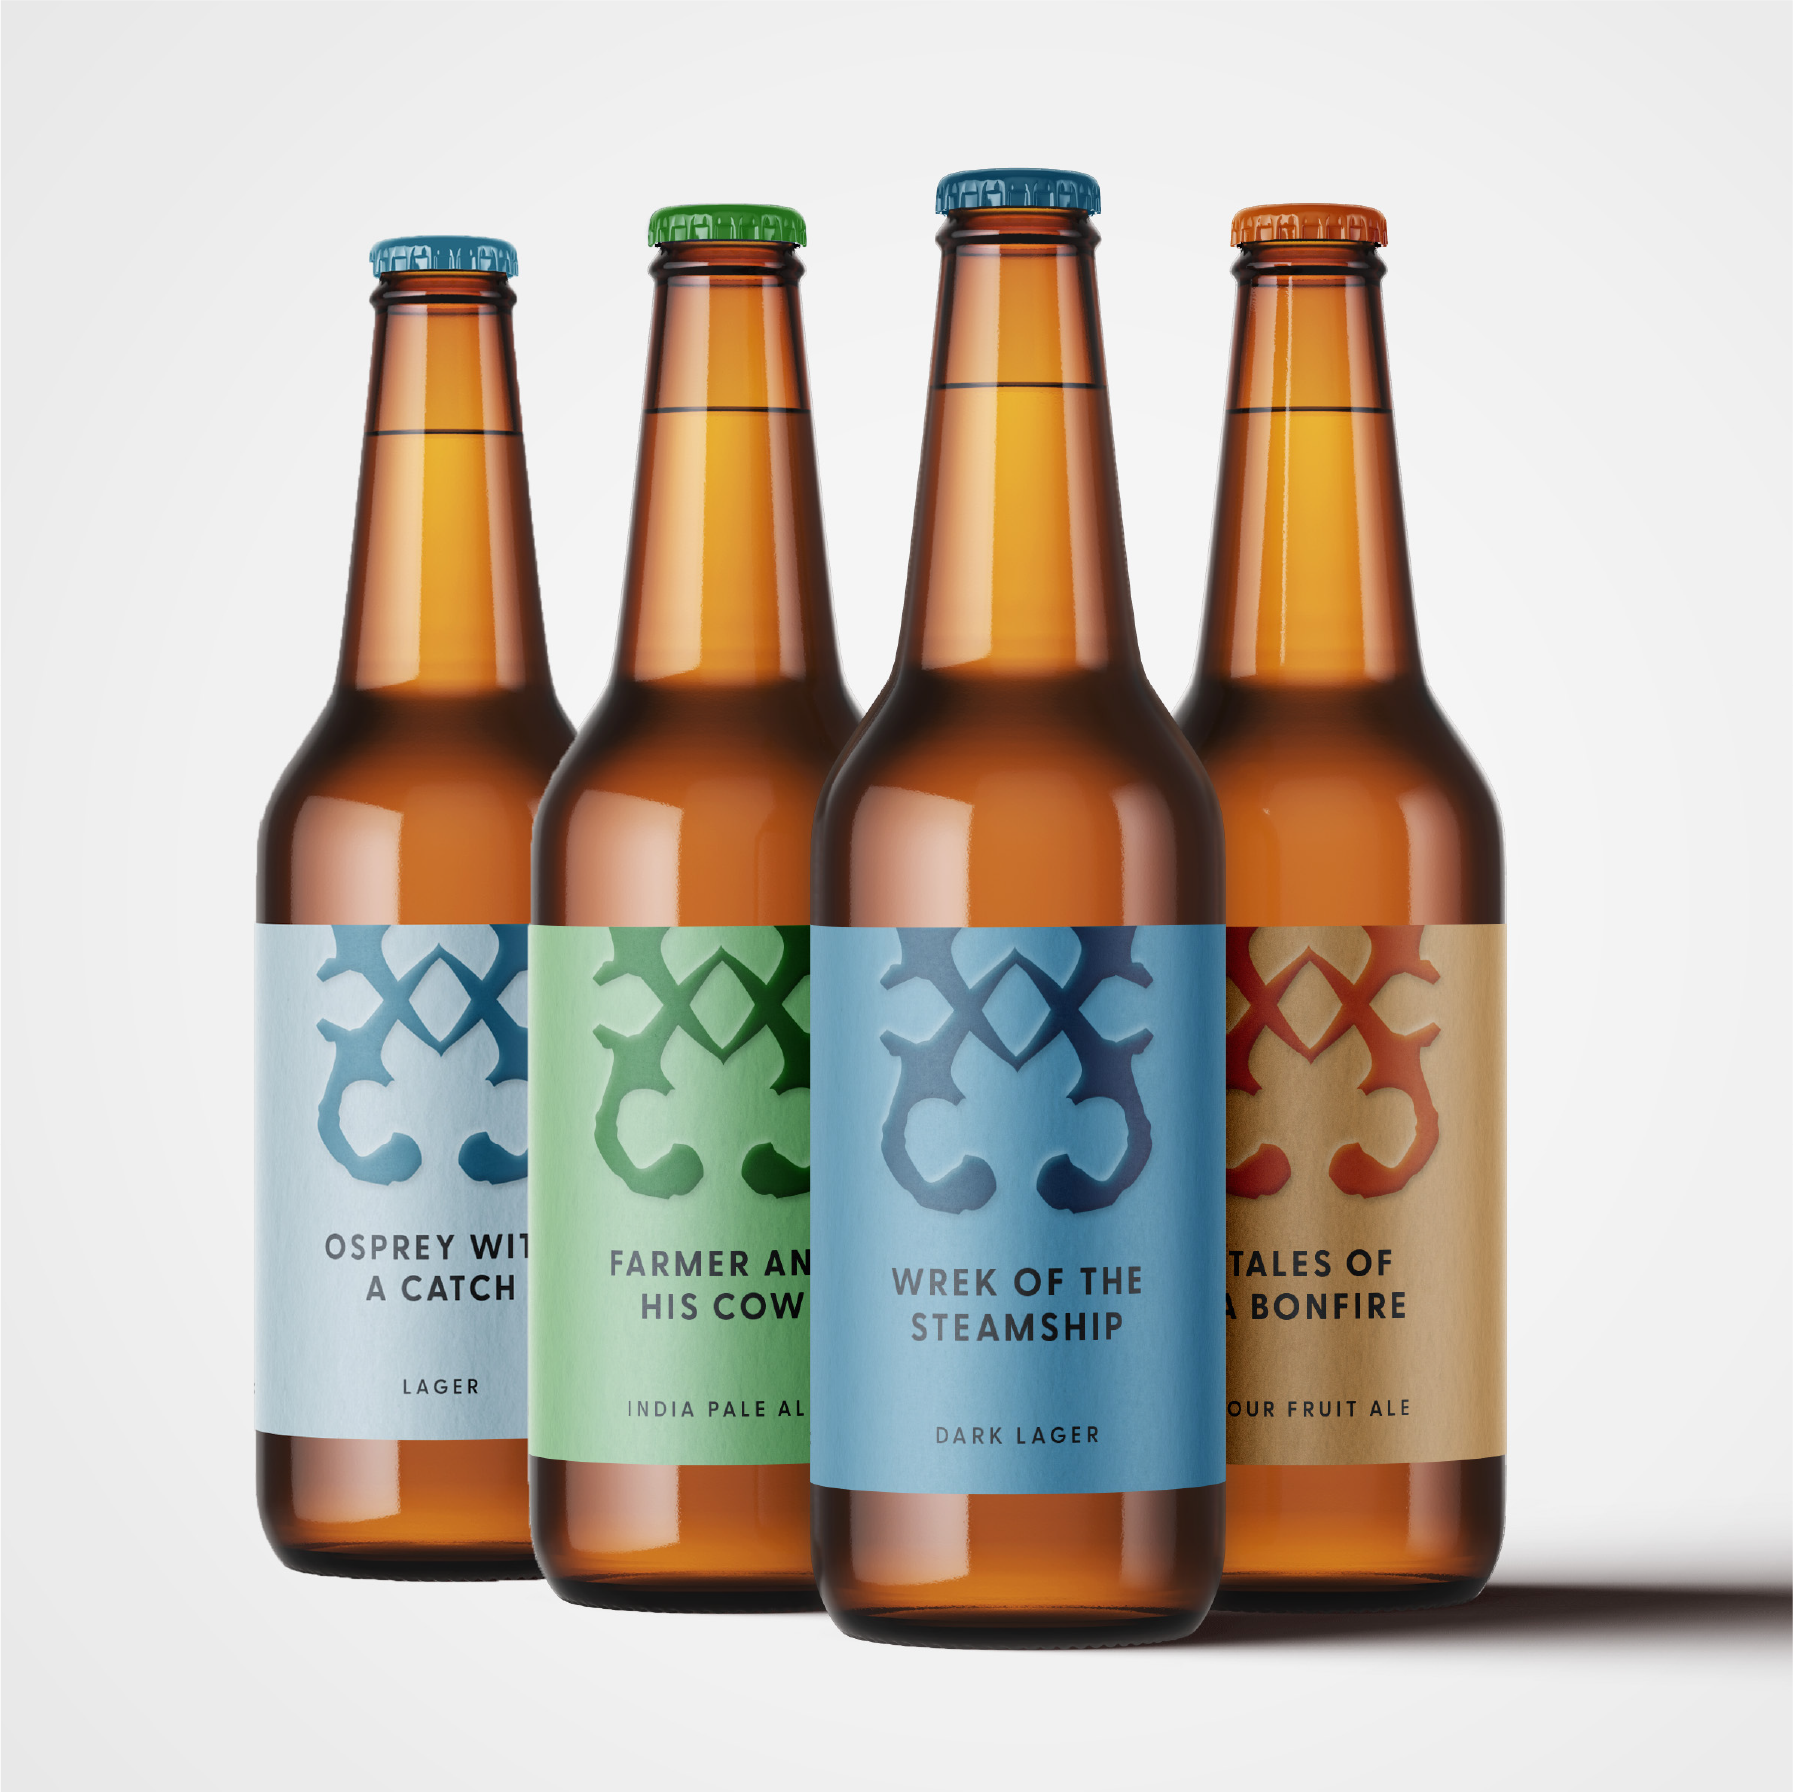 Image of four different beer bottles from Fyrafina